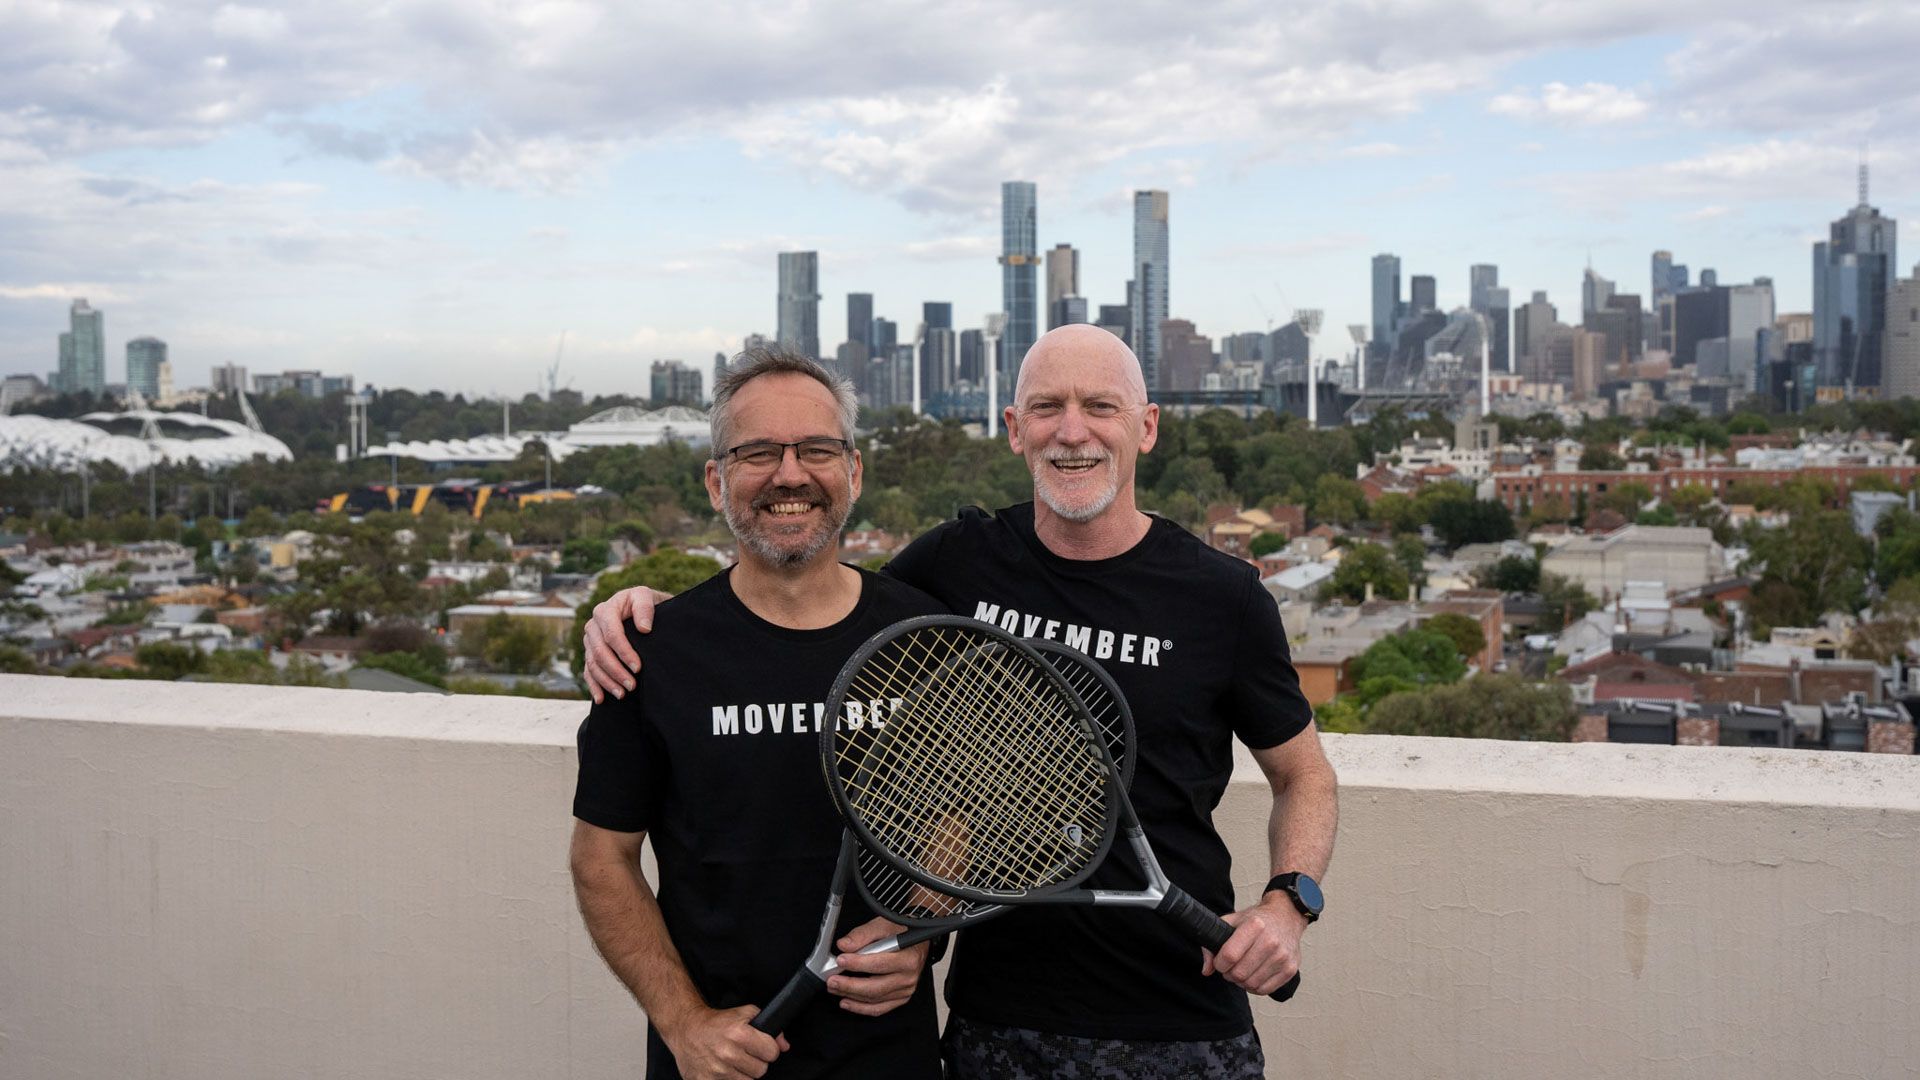 Two men holding tennis rackets, wearing Movember t-shirts, standing on rooftop with city scape in the background. 